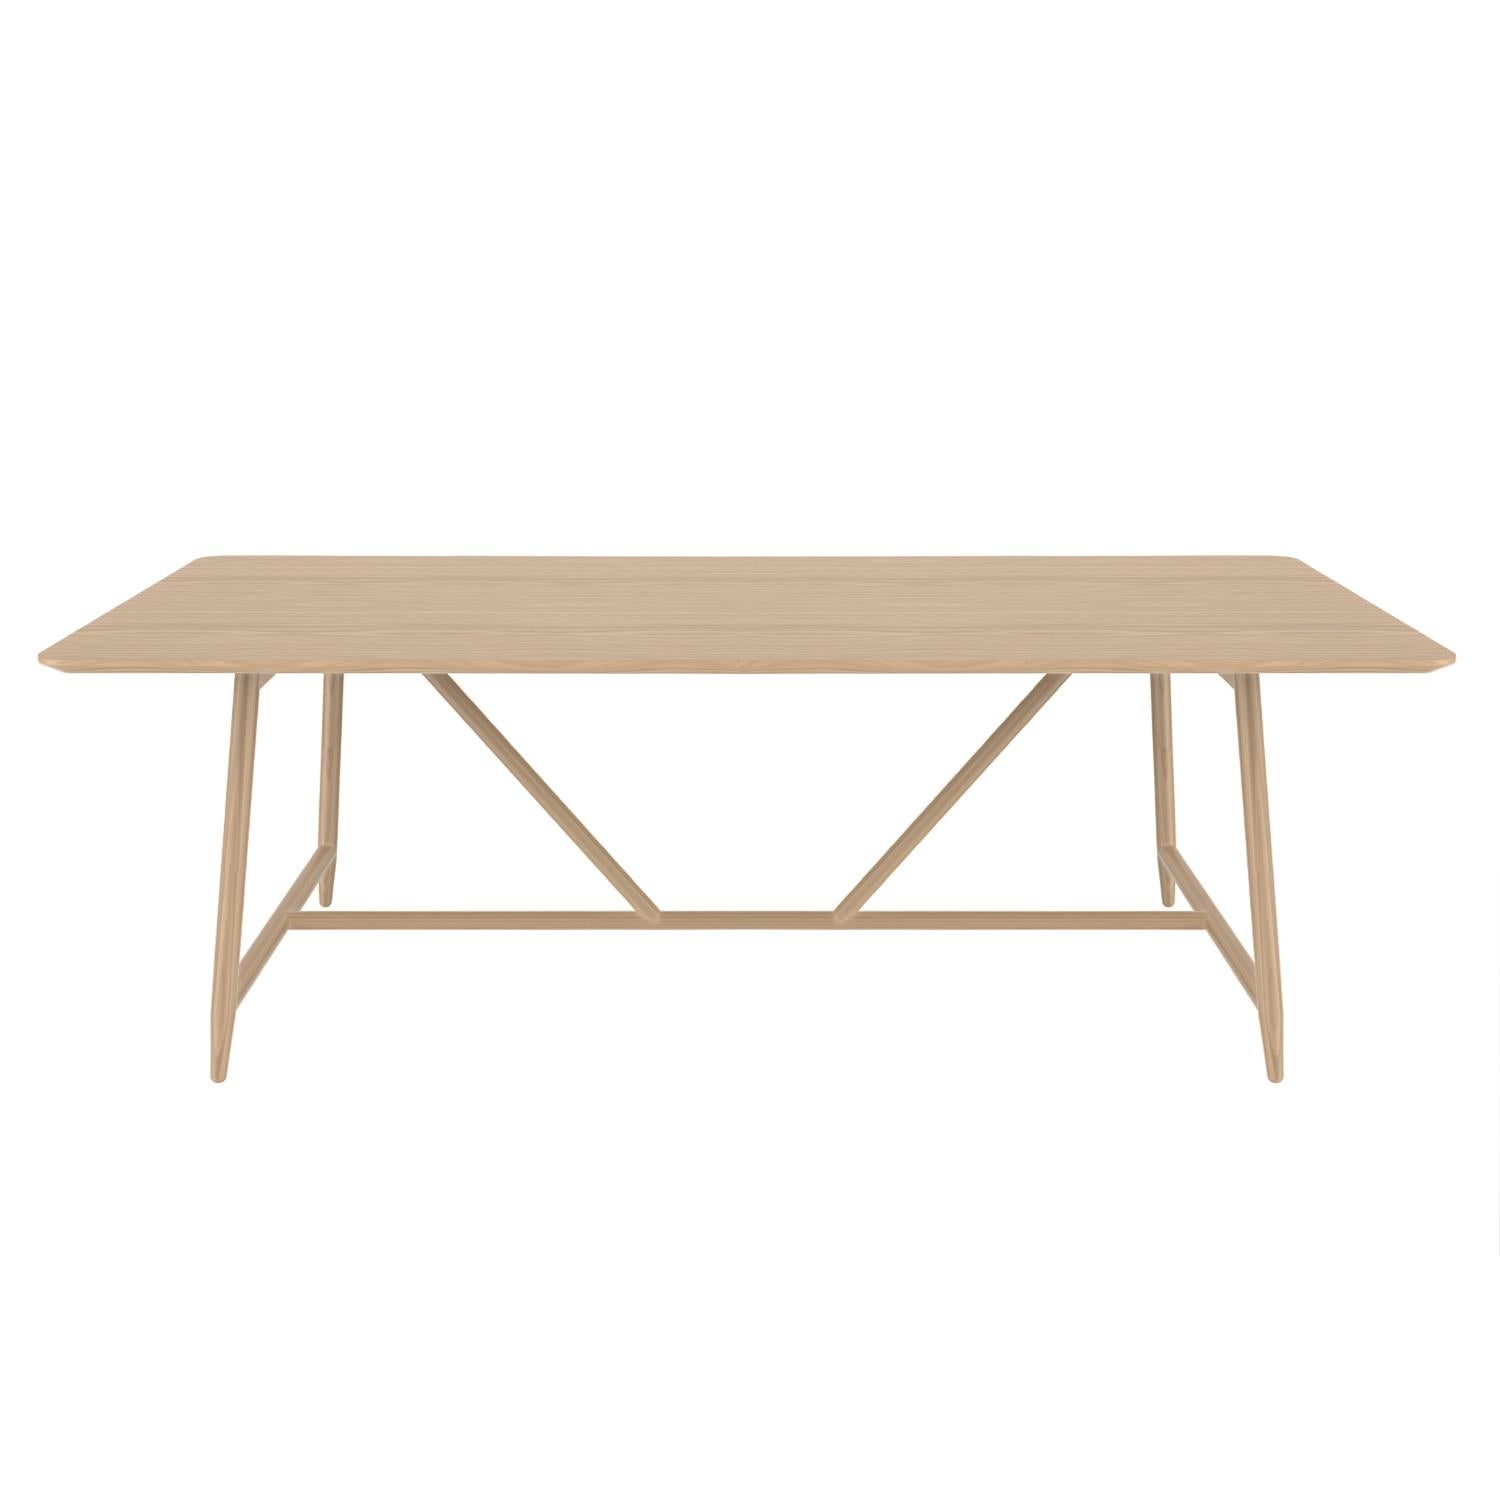 Dal is a customizable dining table that is purely simple yet still strong and elegant. Just like the naked beauty and elegance hidden in tree branches, as this was the guiding idea when designing Dal.

The minimal design language when combined